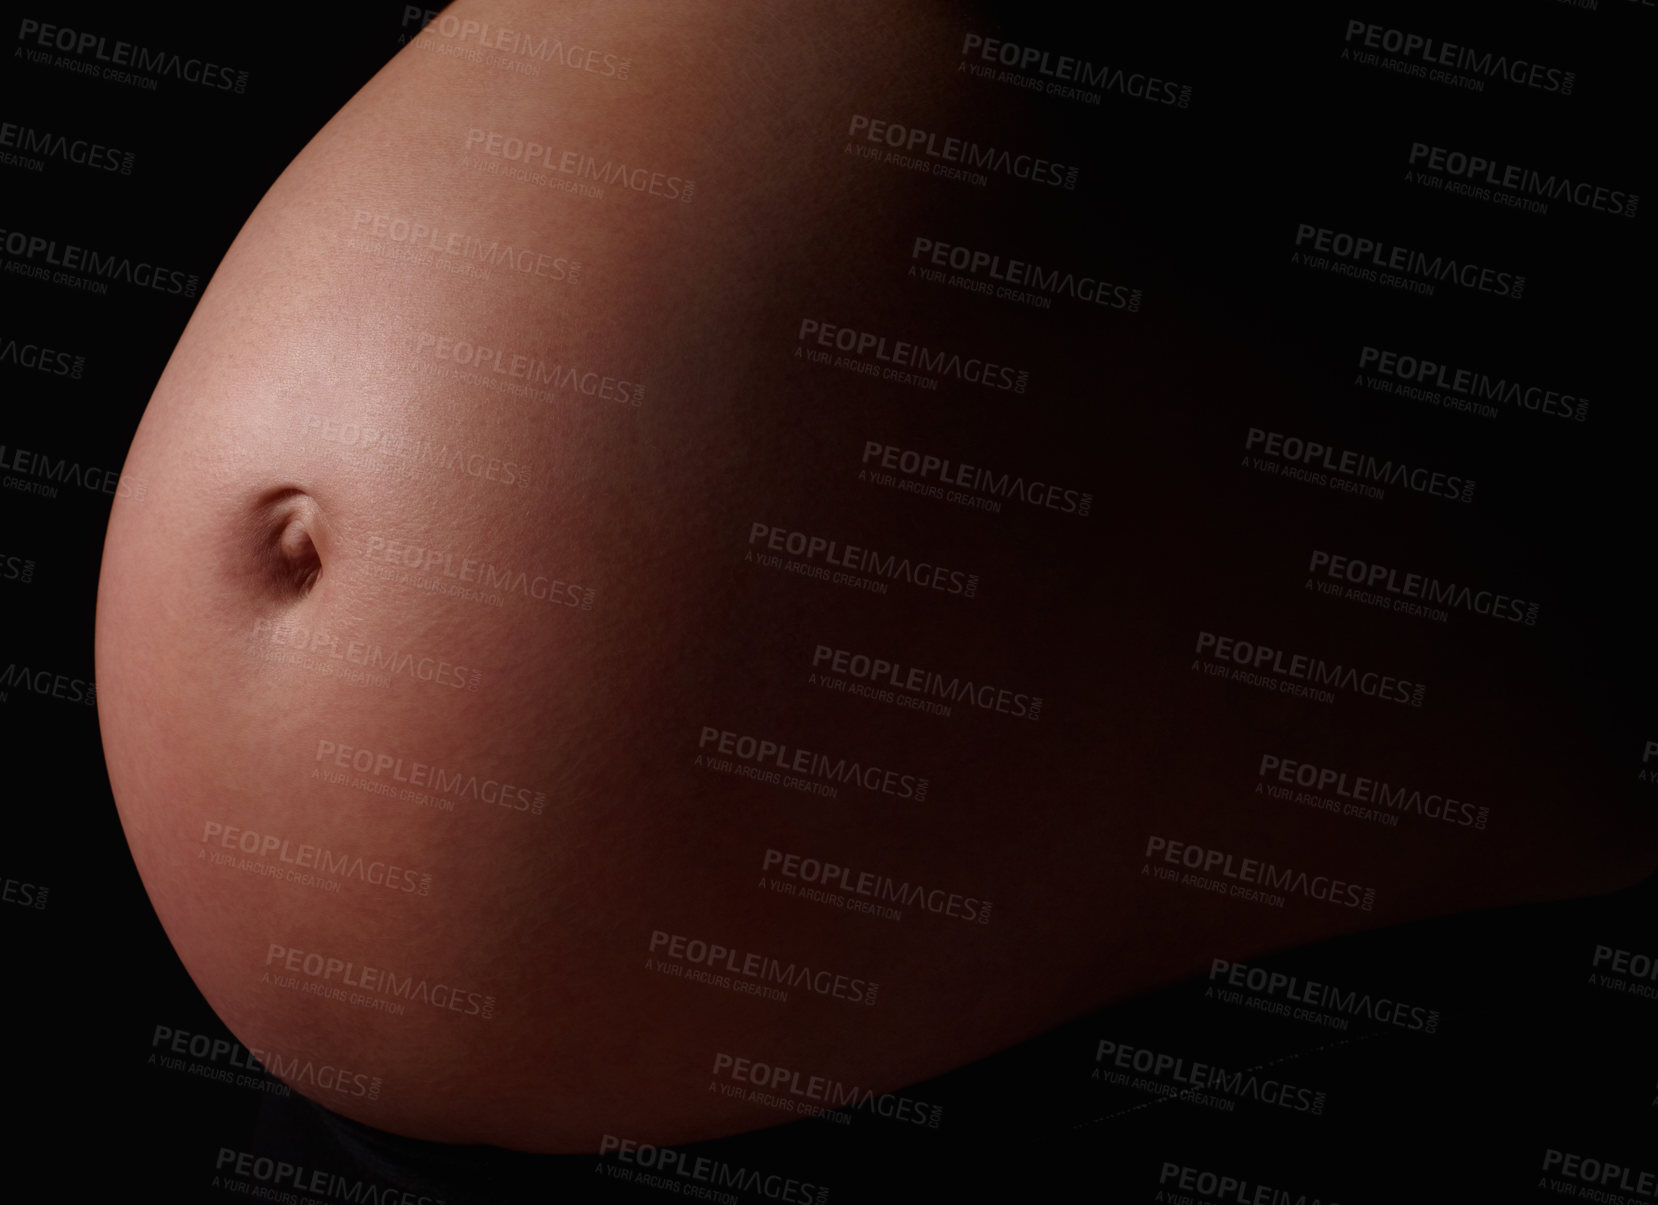 Buy stock photo Belly of a pregnant woman against black background